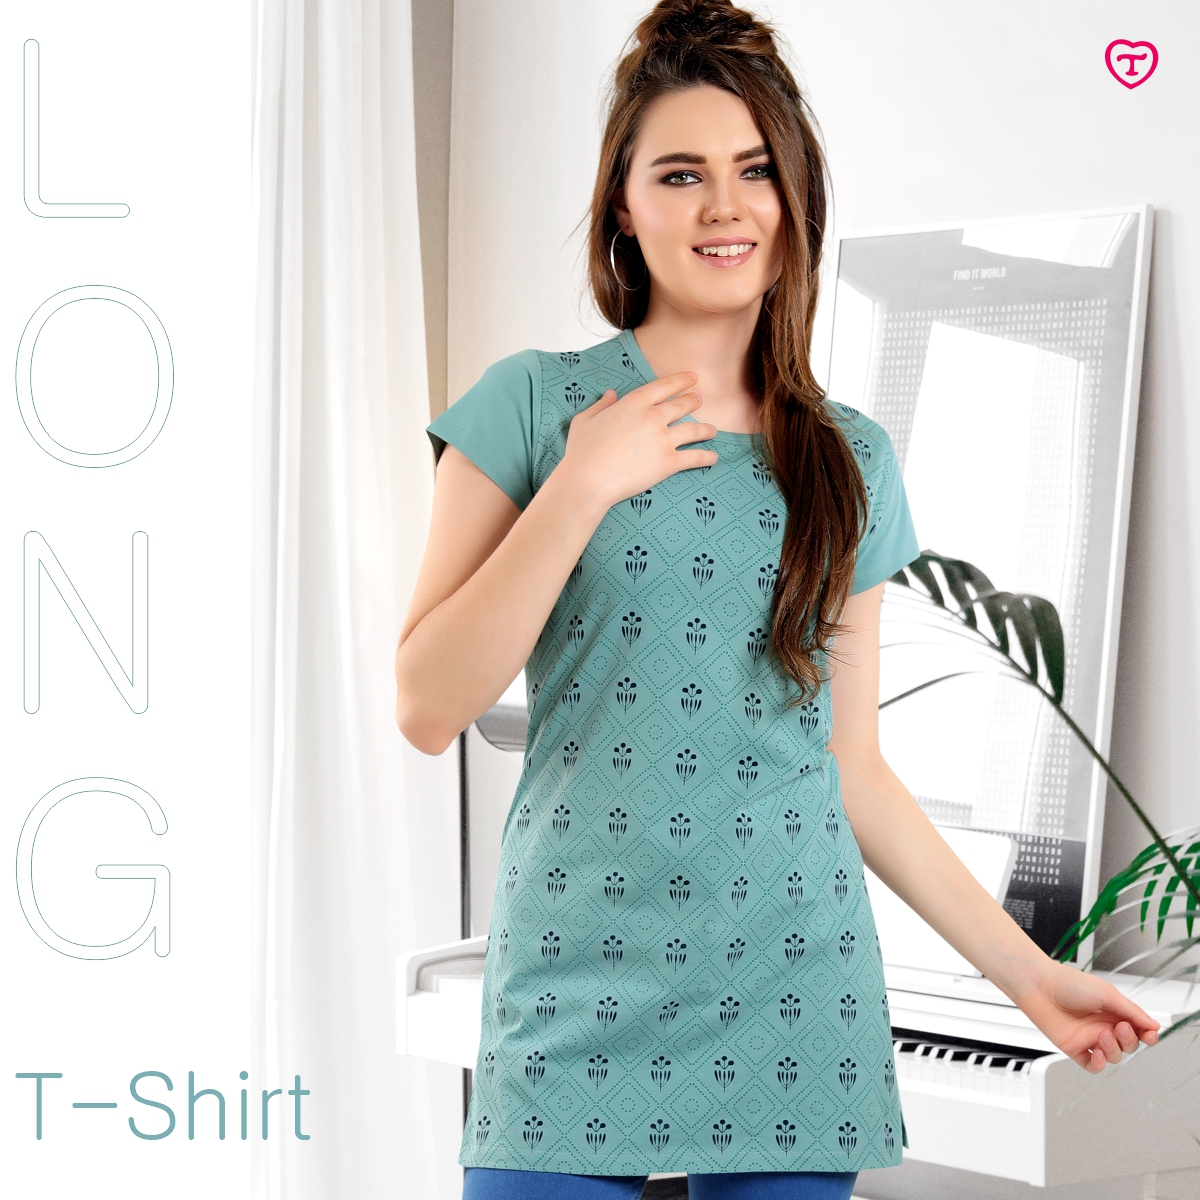 Trylo Intimates on X: Elevate your comfort game with our Long T-shirt –  where comfort meets style! 🌟 Product shown - Riza Long T-Shirt #TryloIndia  #TryloIntimates #RizaIntimates #RizabyTrylo #LongTshirt #ComfortableFashion  #StandOutStyle